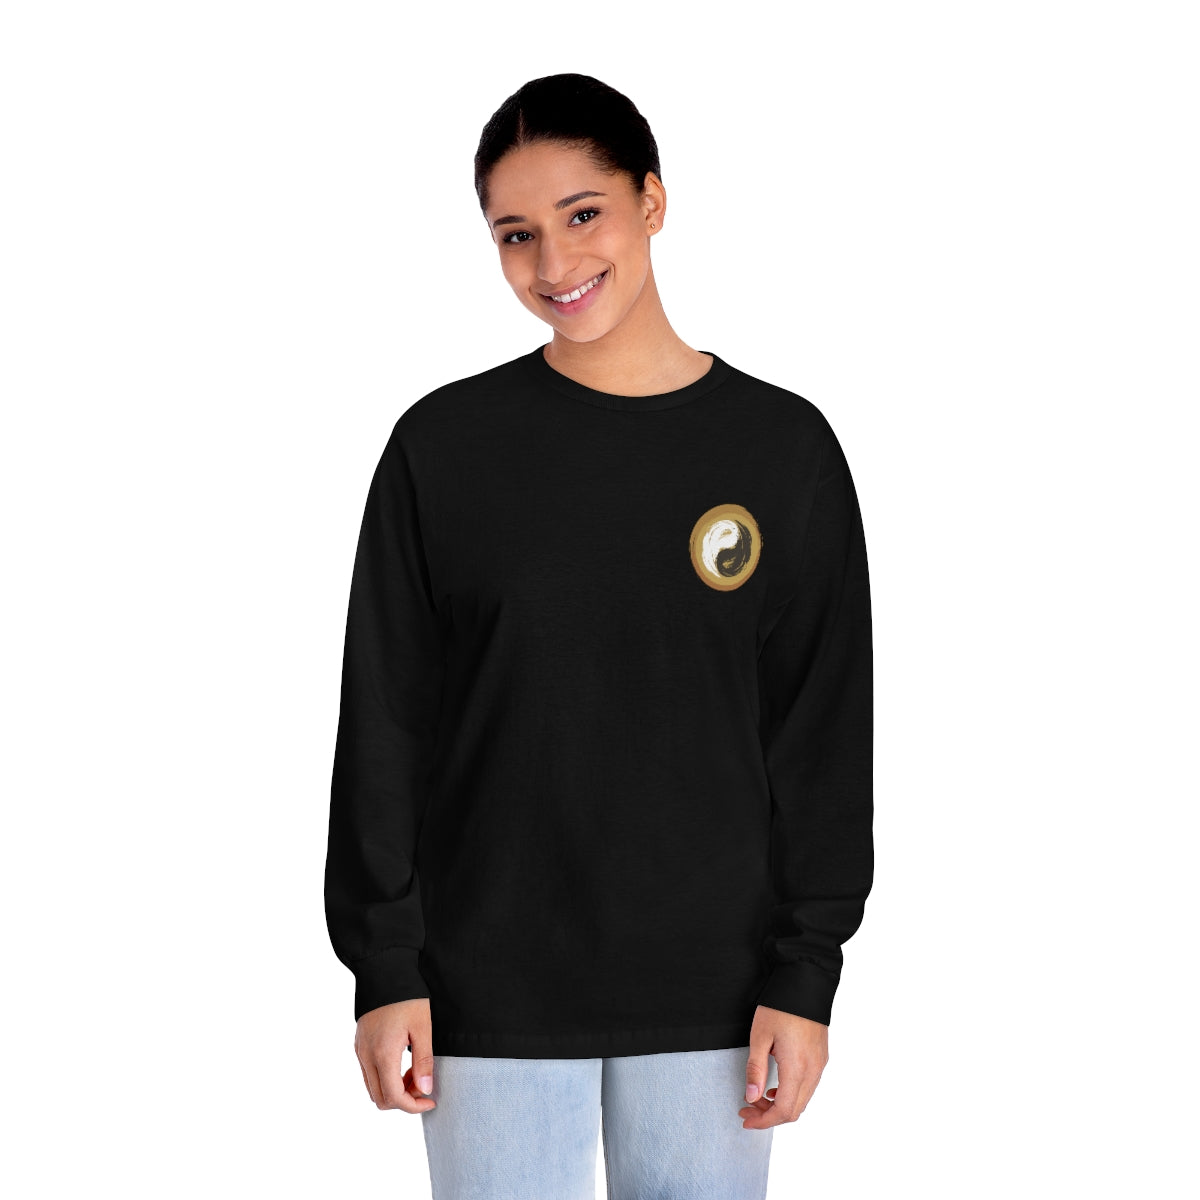 Unisex Classic Long Sleeve Yoga T-Shirt - Made with 100% US cotton - Personal Hour for Yoga and Meditations 